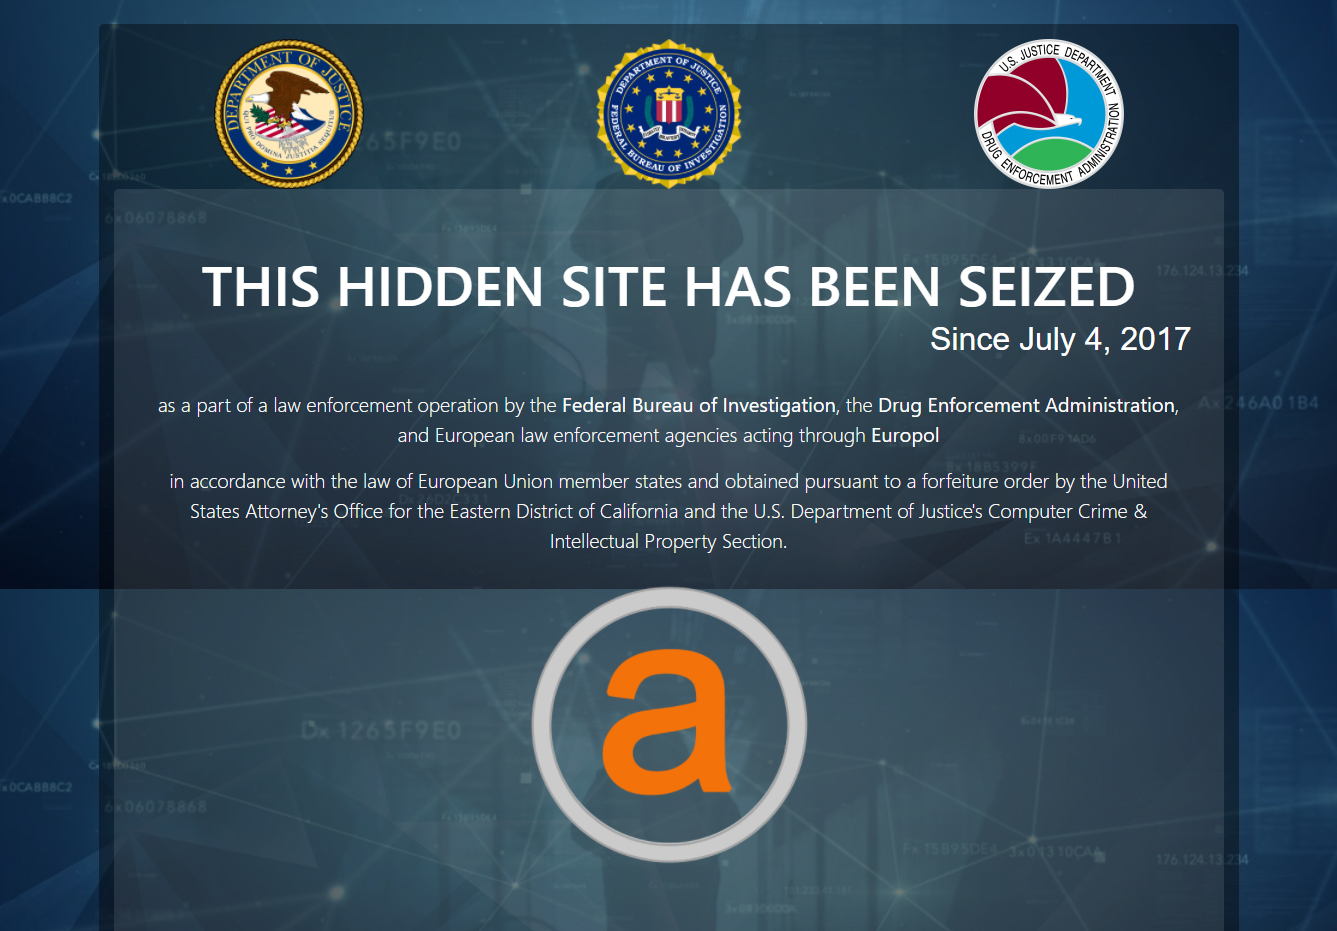 AlphaBay Dark web marketplace for all things evil is shut down